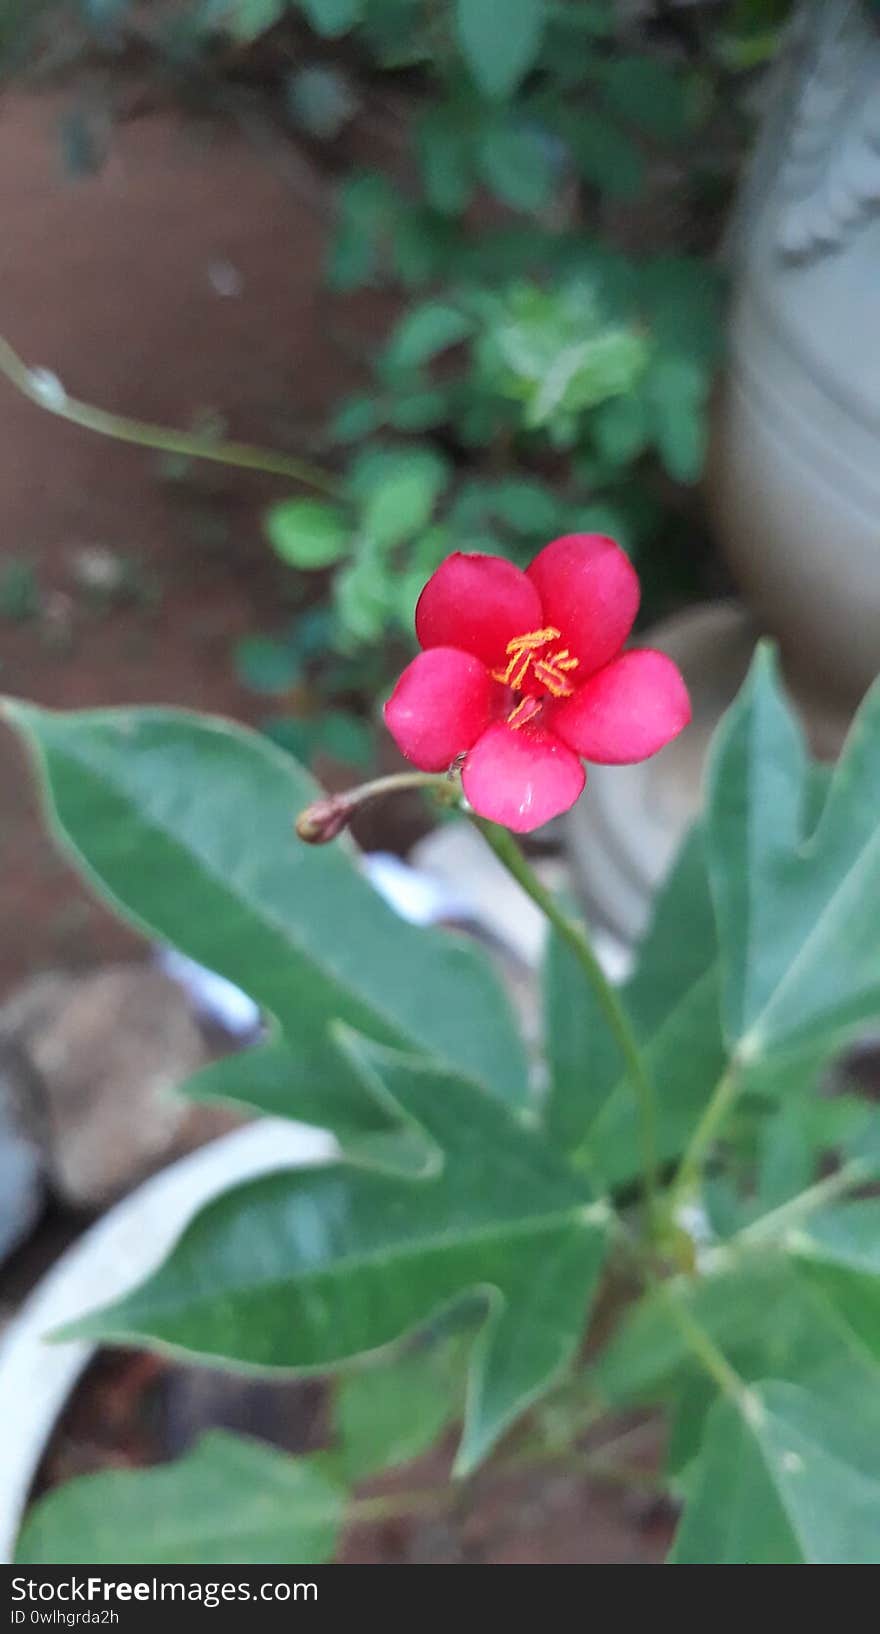 Very small size thick red brilliant color attractive flower for your garden. Very small size thick red brilliant color attractive flower for your garden.